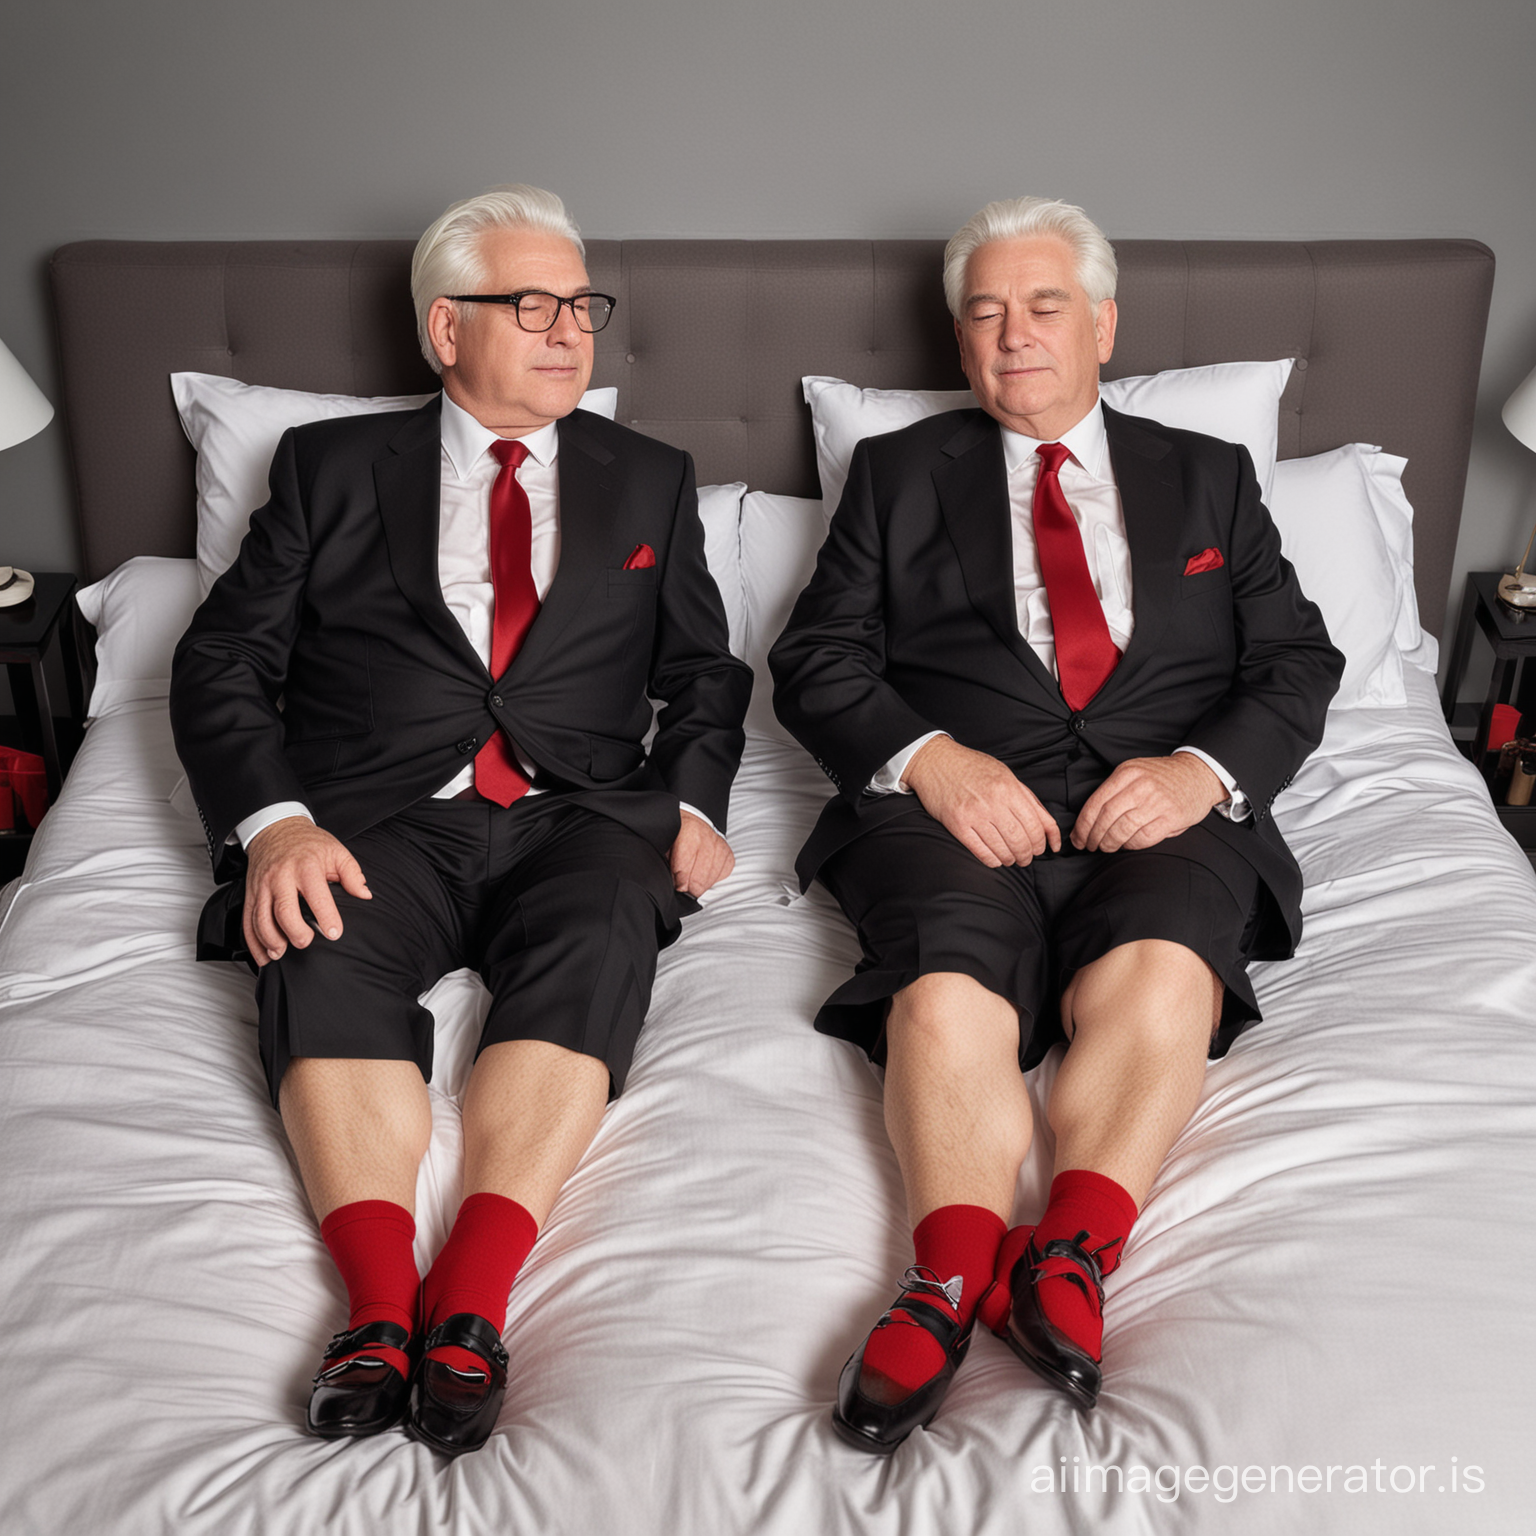 2 elderly fat senior businessmen, white hair, totally naked, only wearing scarlet socks and black dress loafers, laying on a bed, close eyes, full body shot